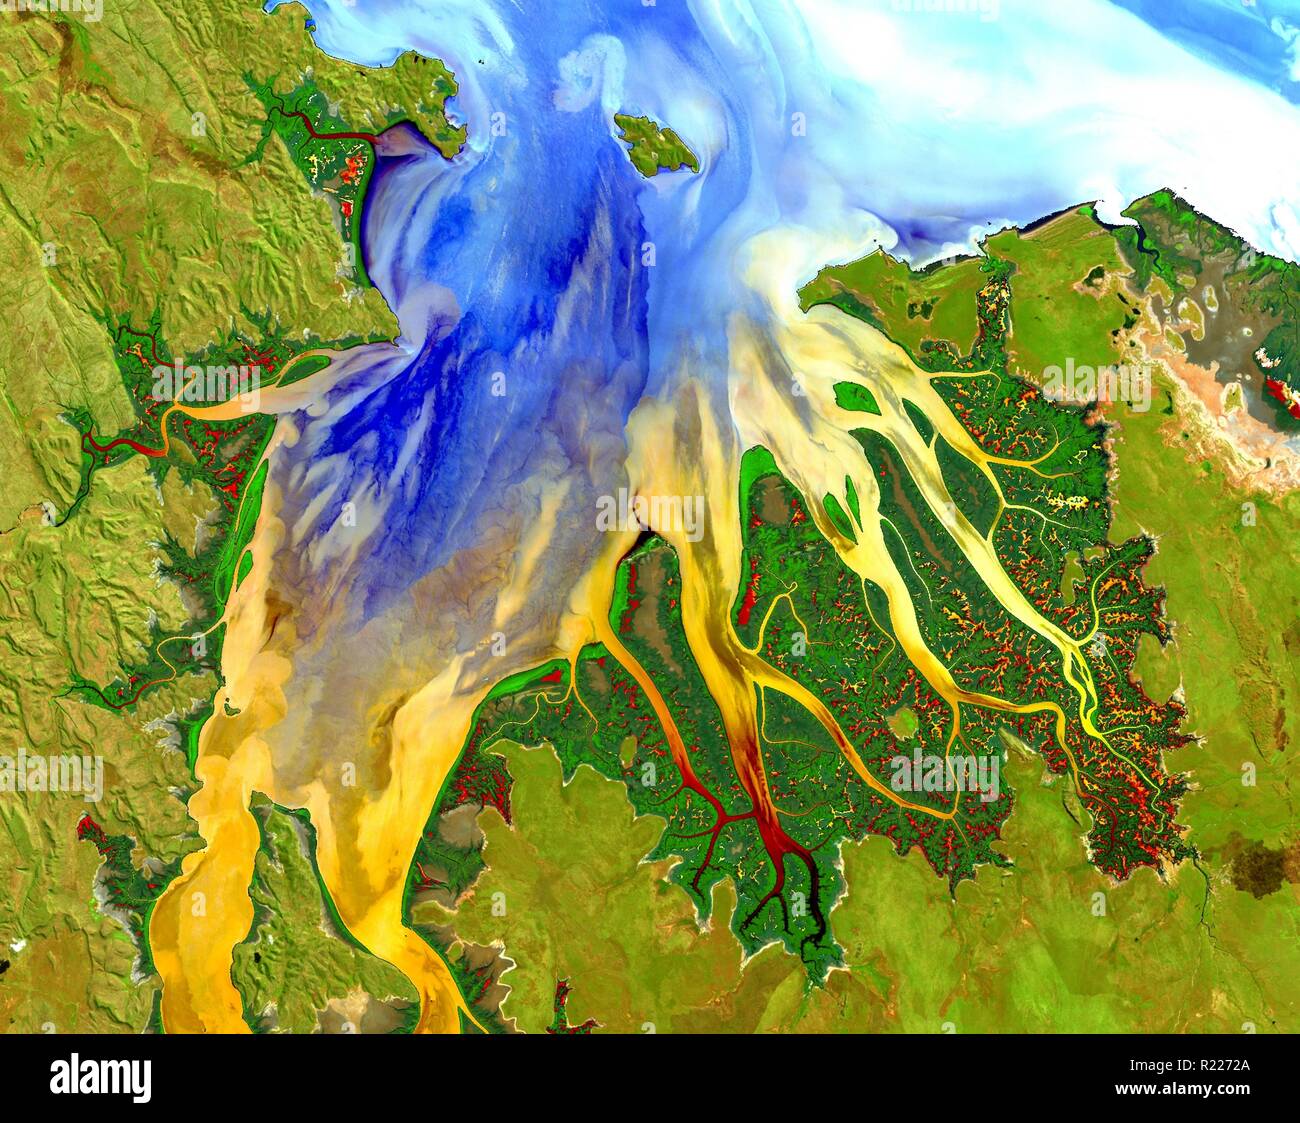 Landsat 8 scene acquired May 12, 2013 in Western Australia. The resulting image displays impressive sediment and nutrient patterns in the tropical estuary Stock Photo